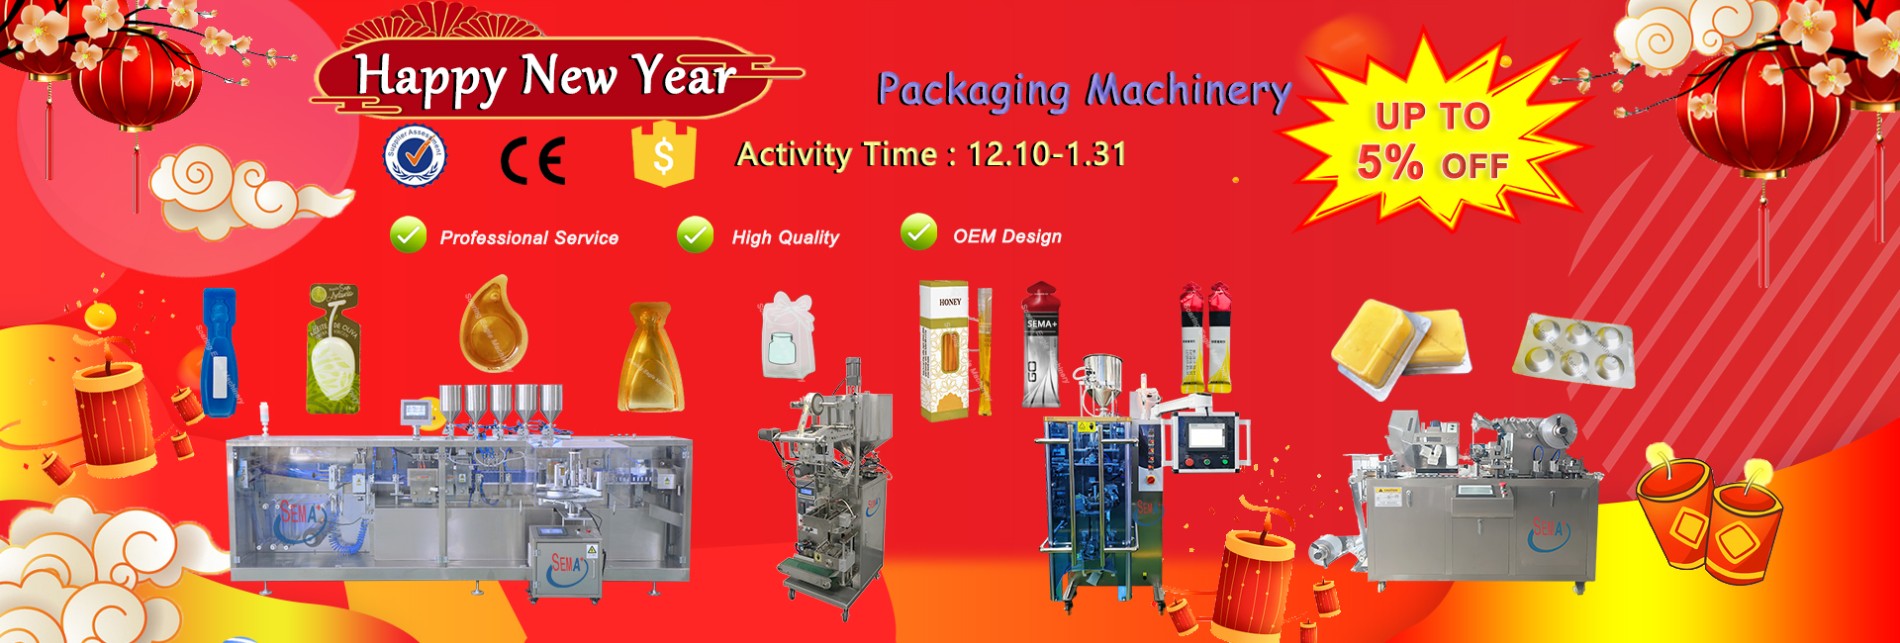 Happy New Year To You——Soaring Eagle Machinery